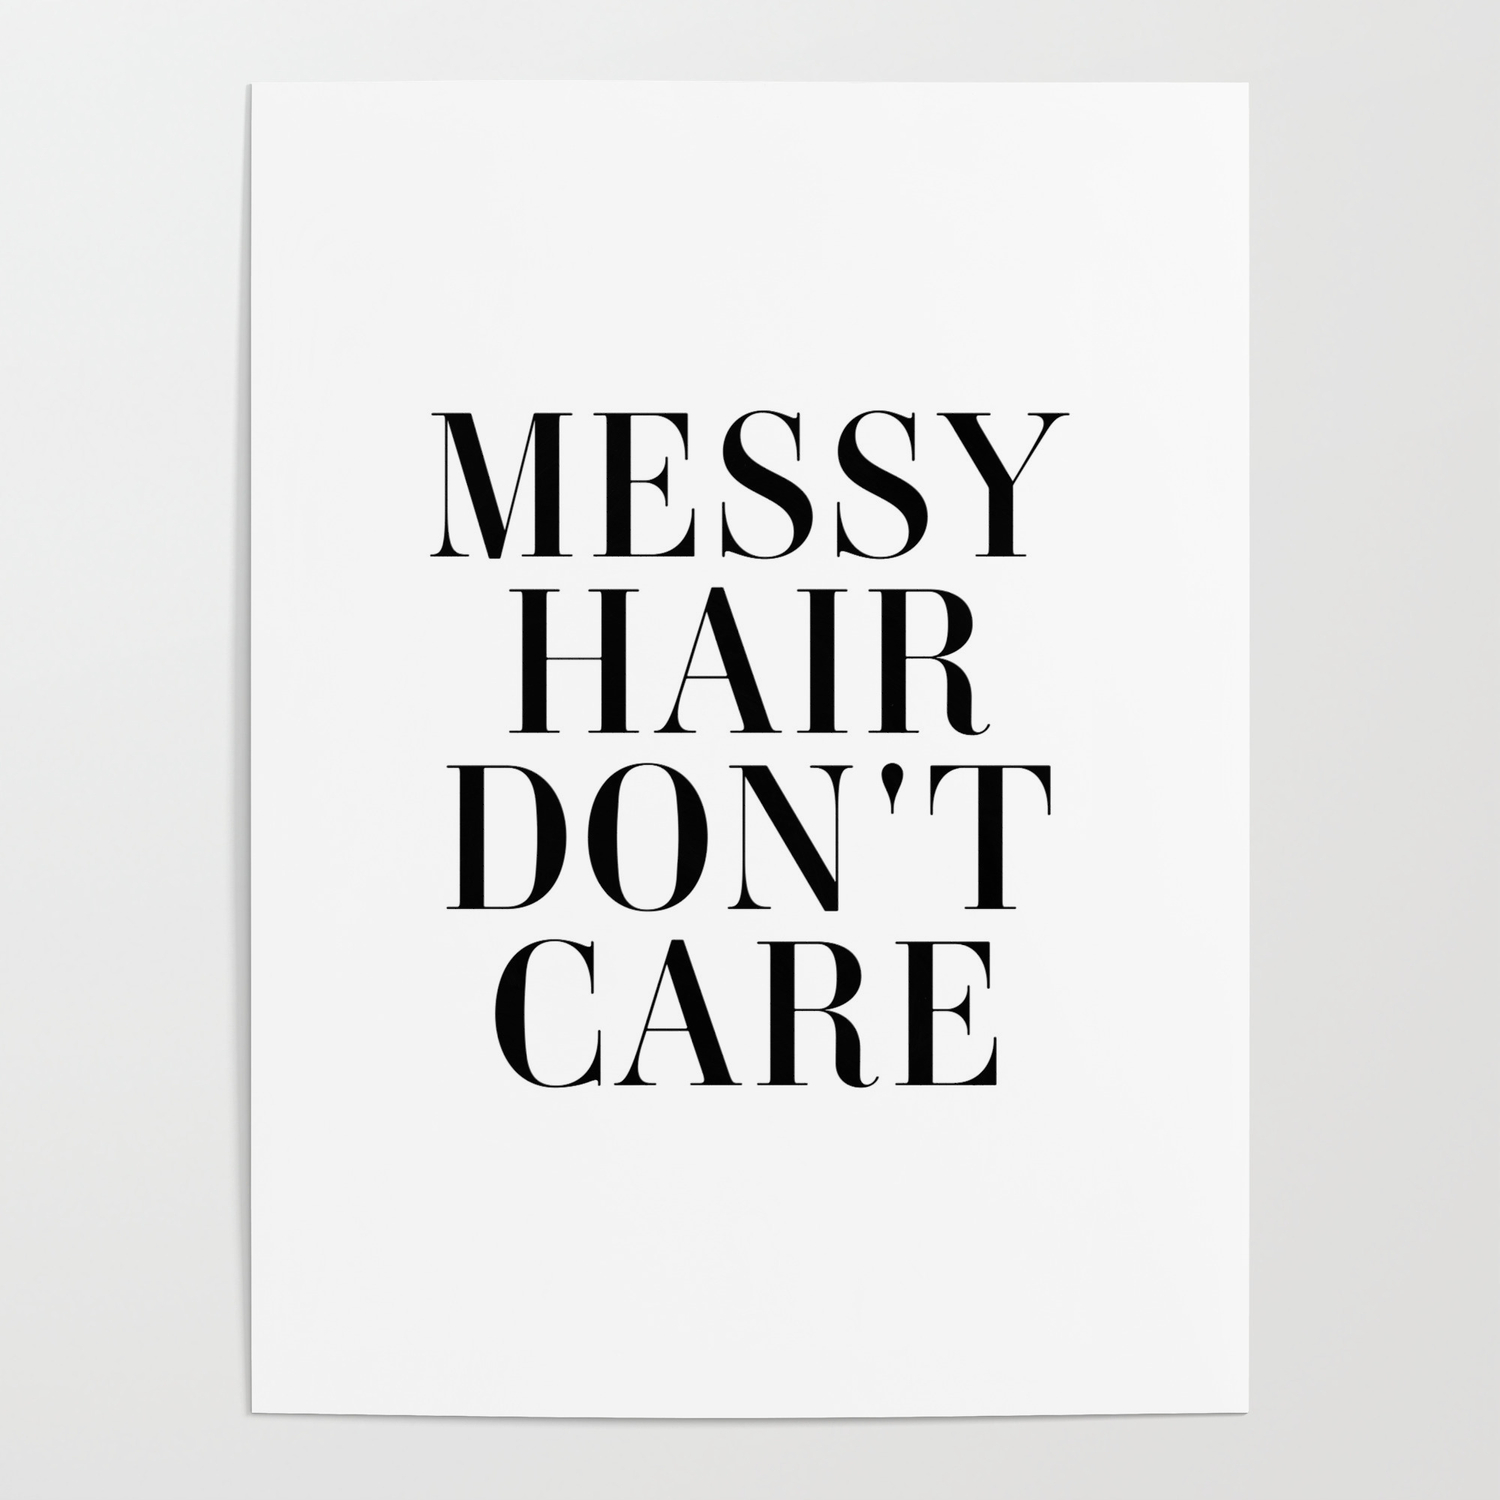 Messy hair don't care Poster by Standard Prints / Posters | Society6